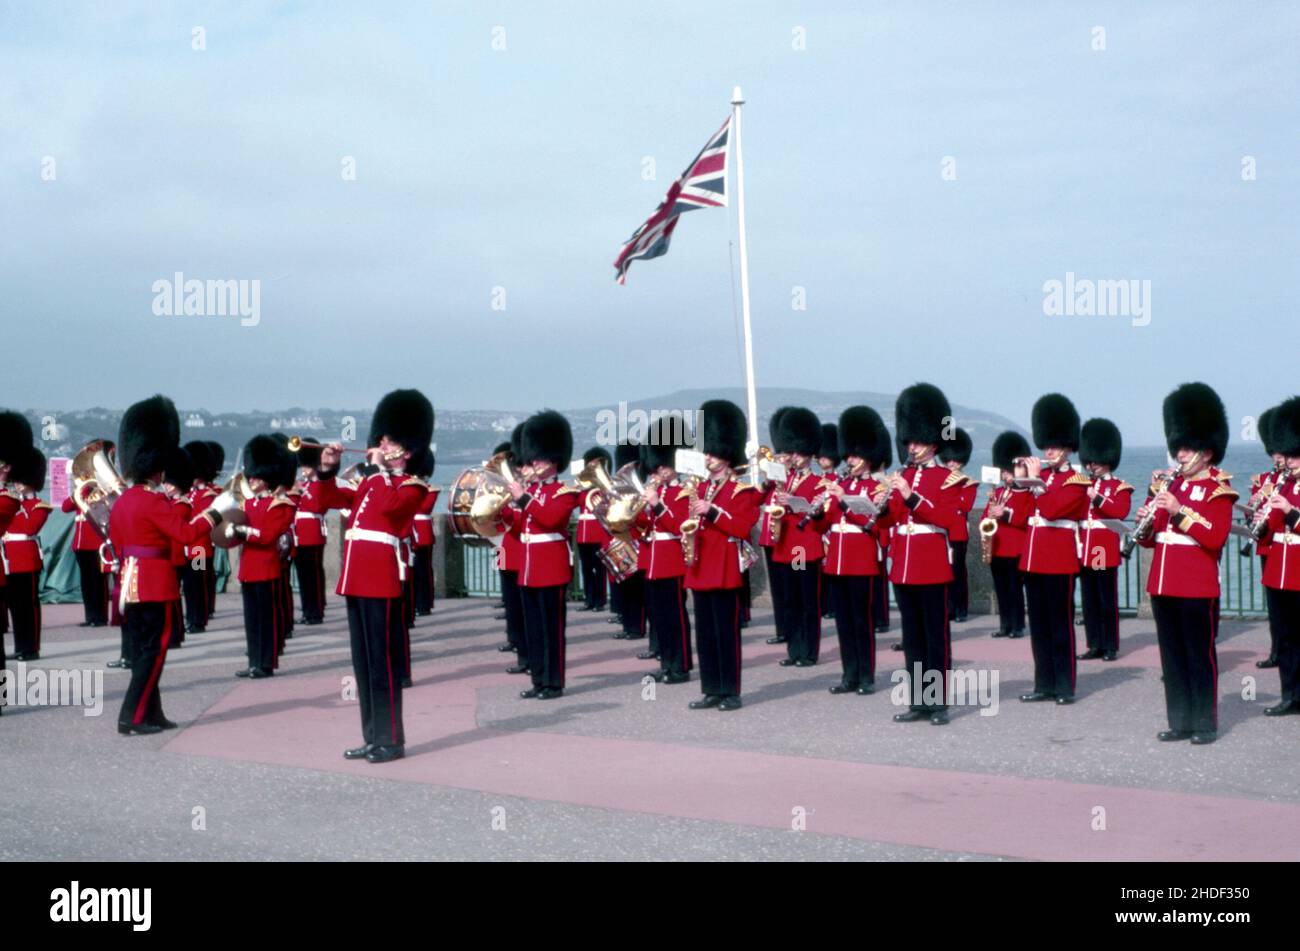 Band of the Scots guard playing with union jack flying against a blue sky. Military band playing concept Stock Photo